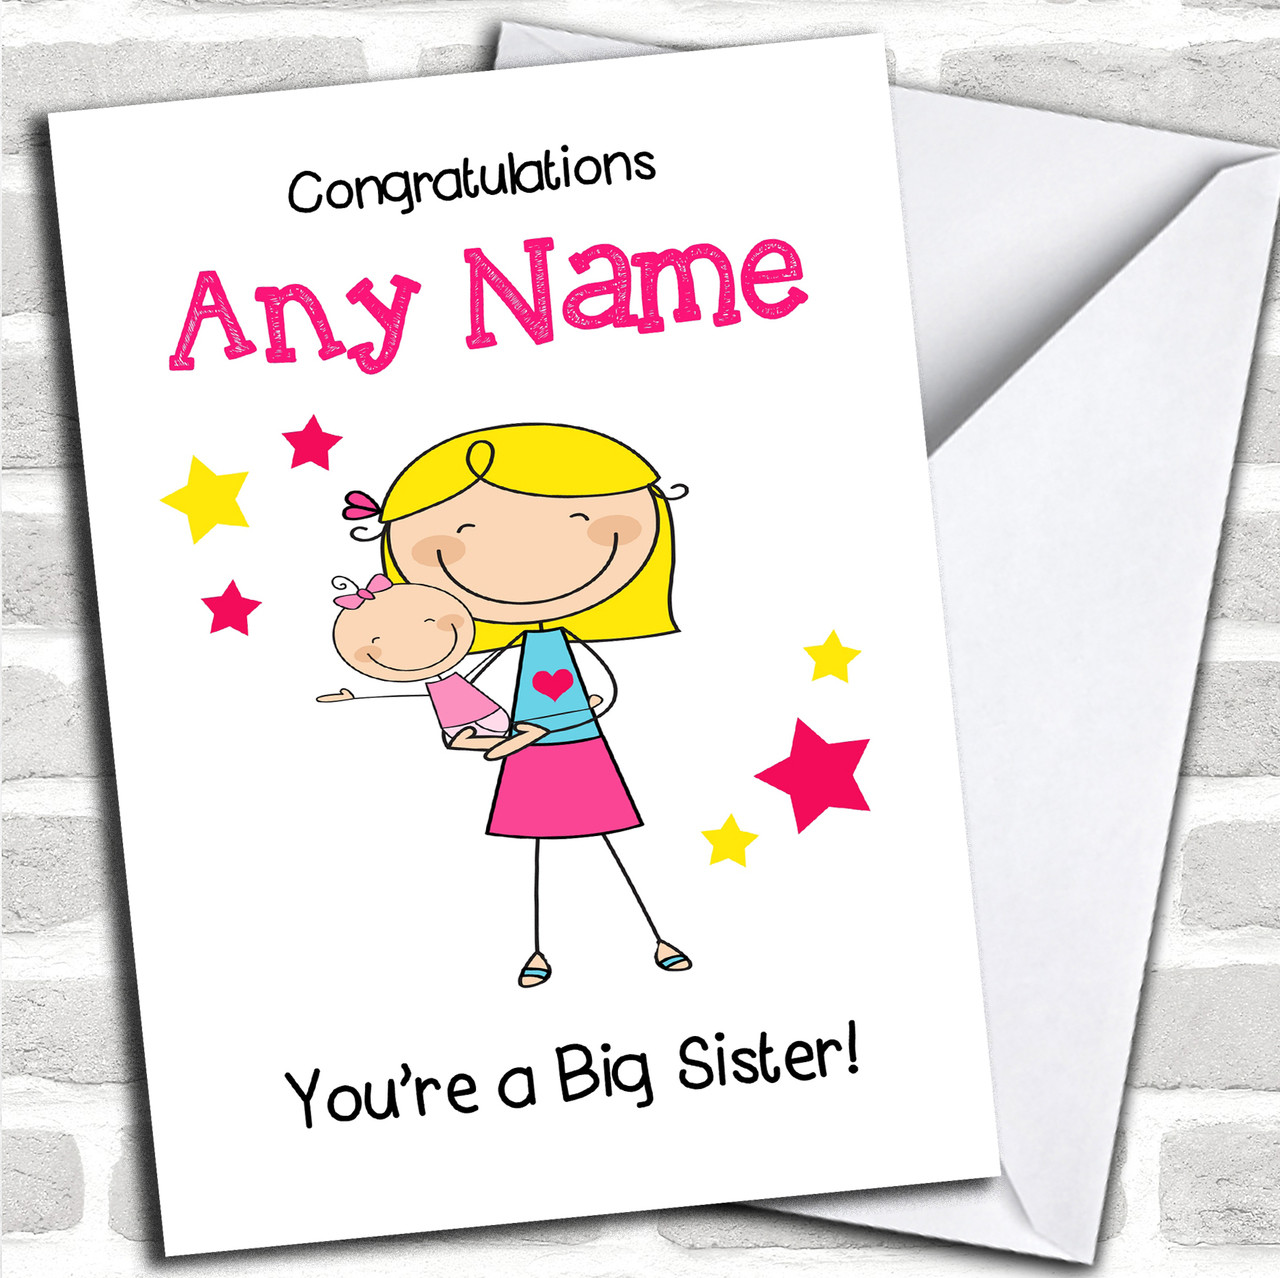 You Got This Baby Congratulations Card